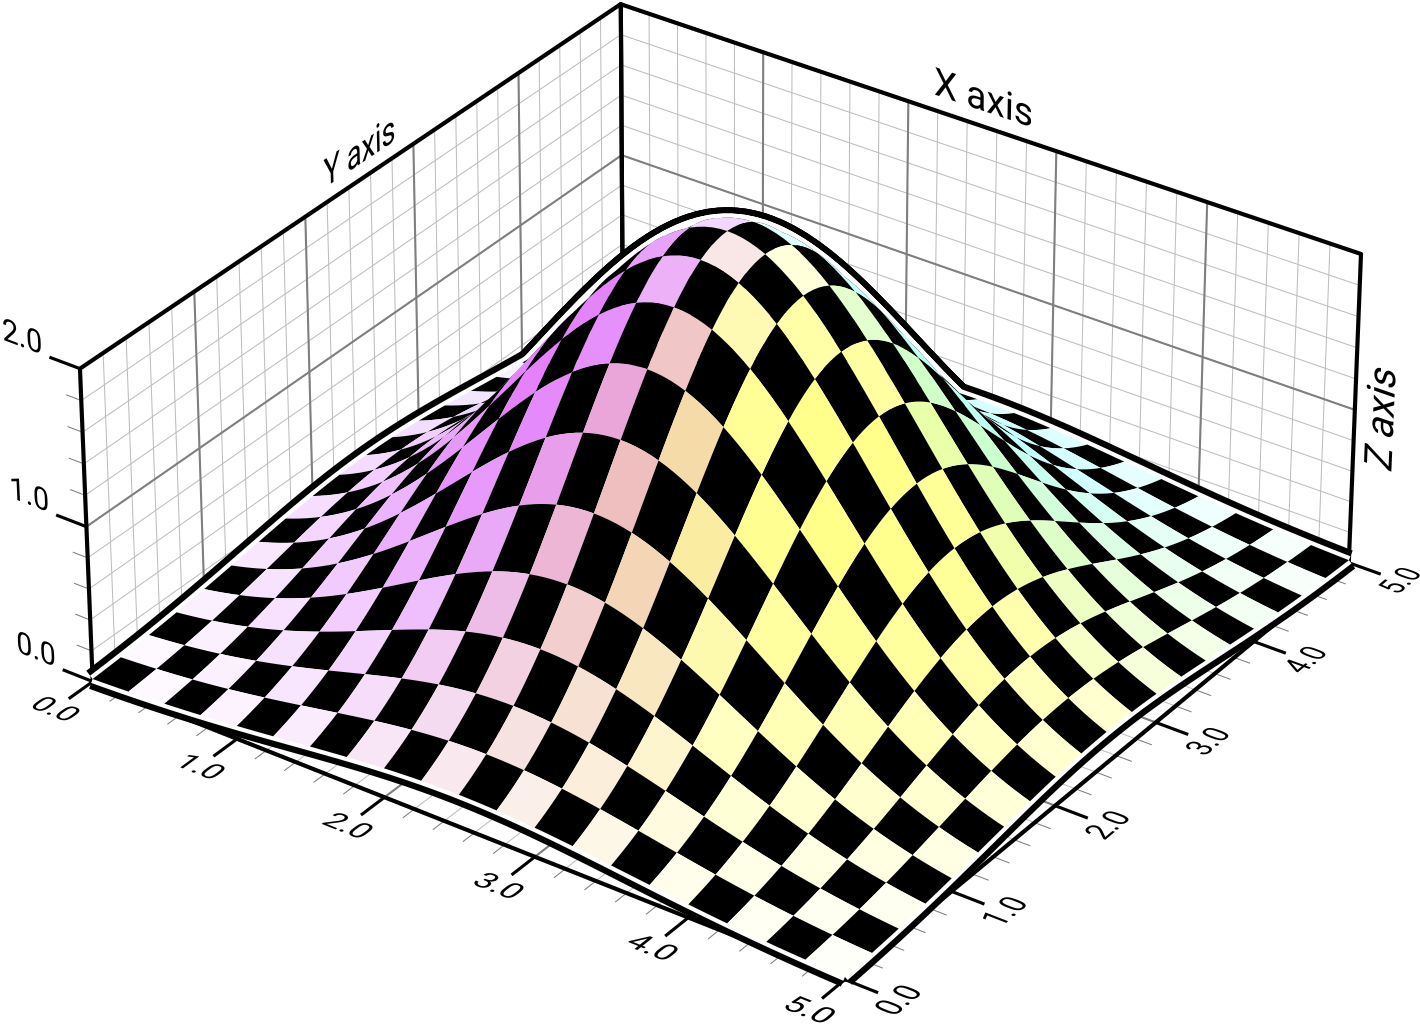 projection-3d-gaussian.png